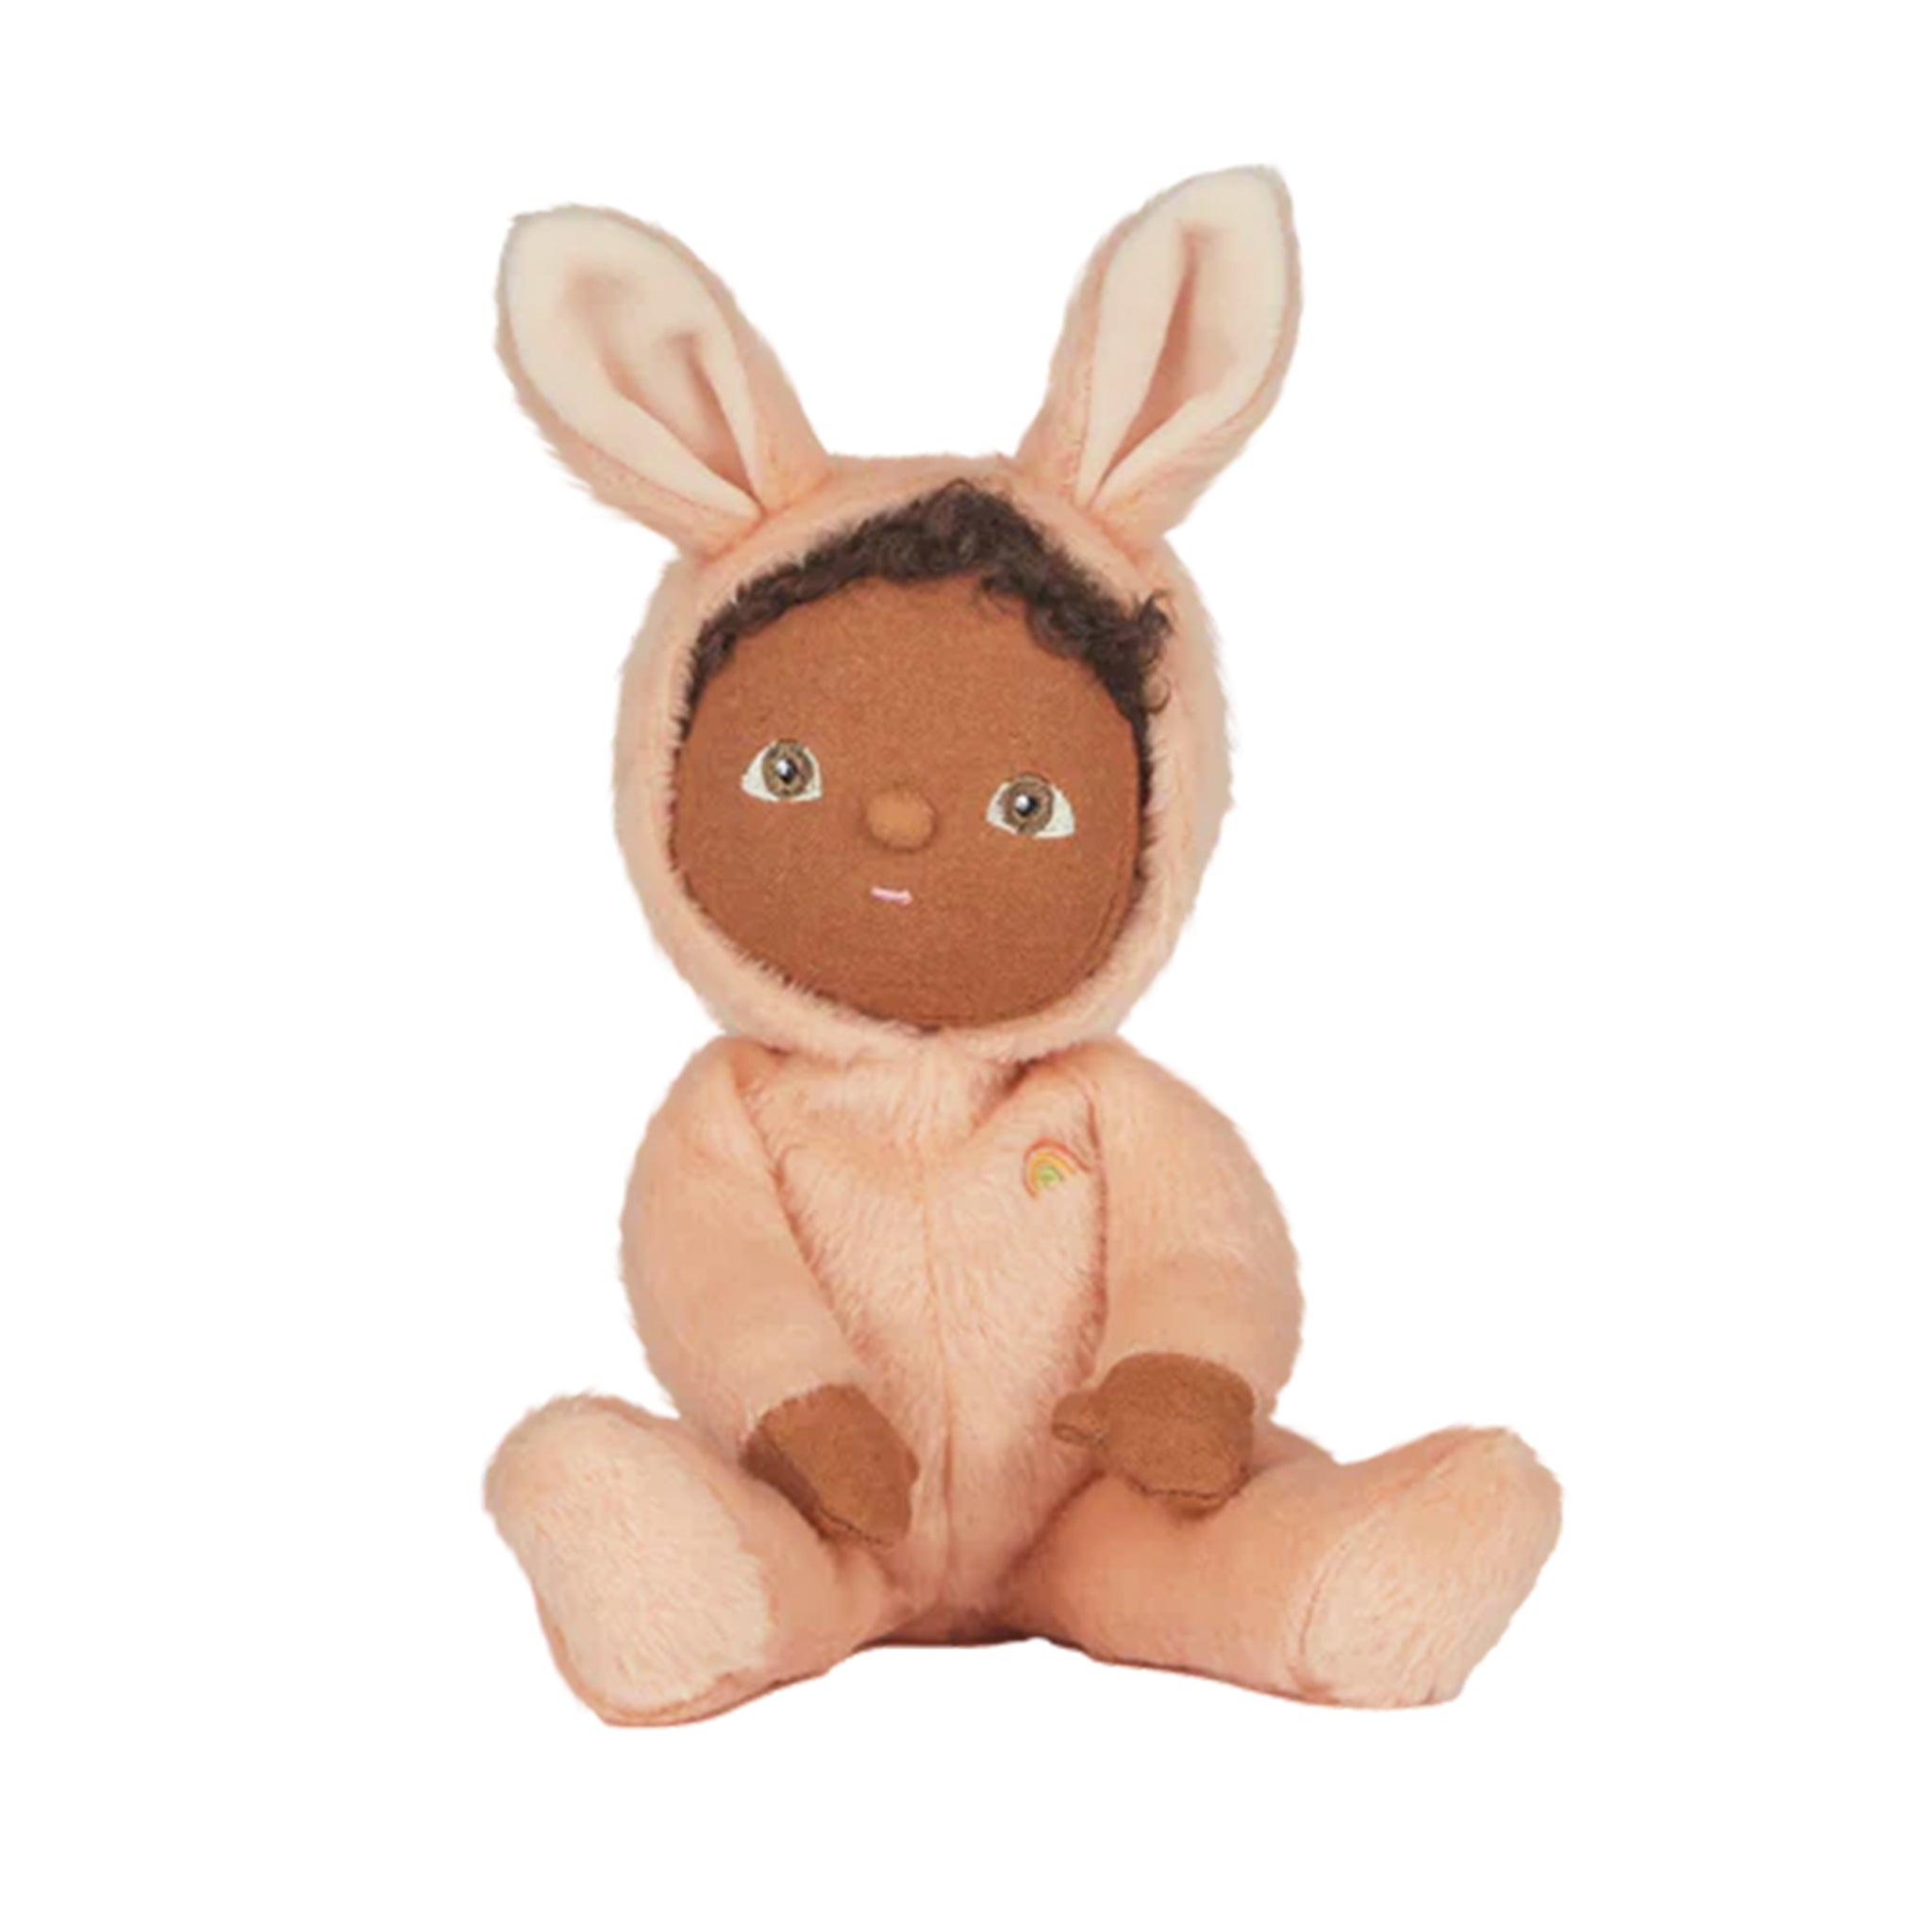 On a white background is a doll with a pink rabbit fuzzy onesie on that has bunny ears. 